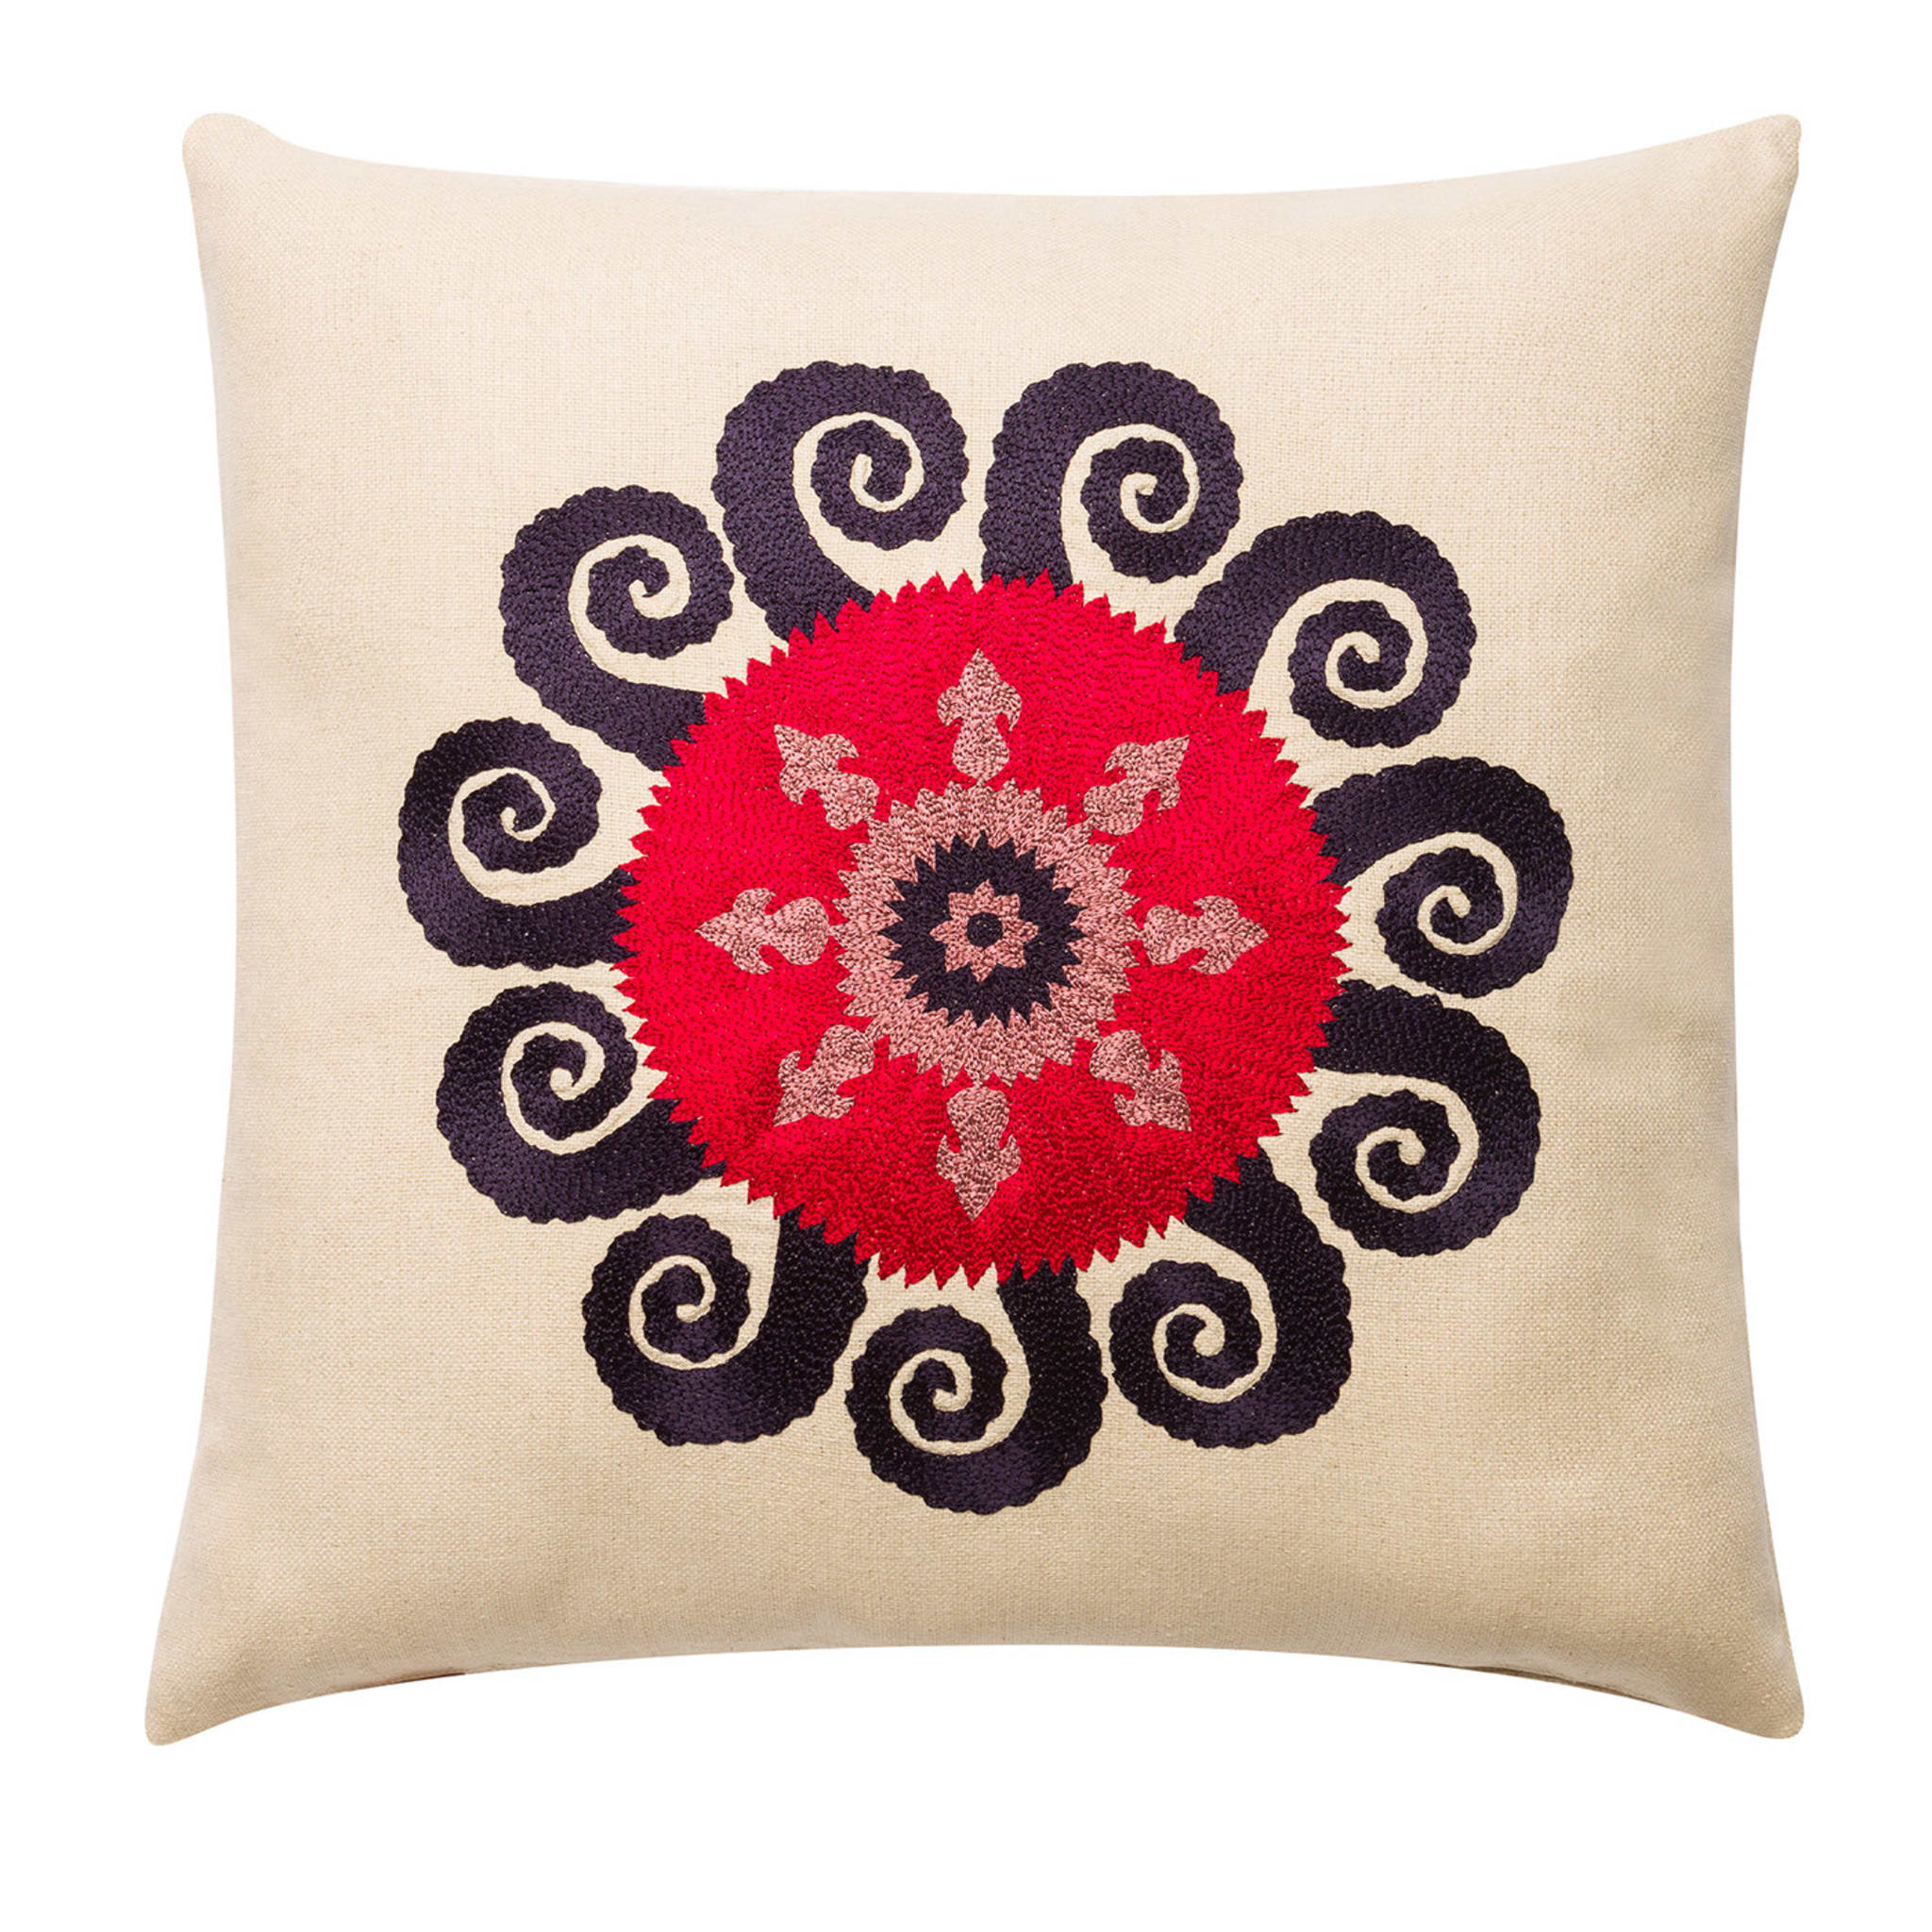 New Sun Square Red Pillowcase - Main view